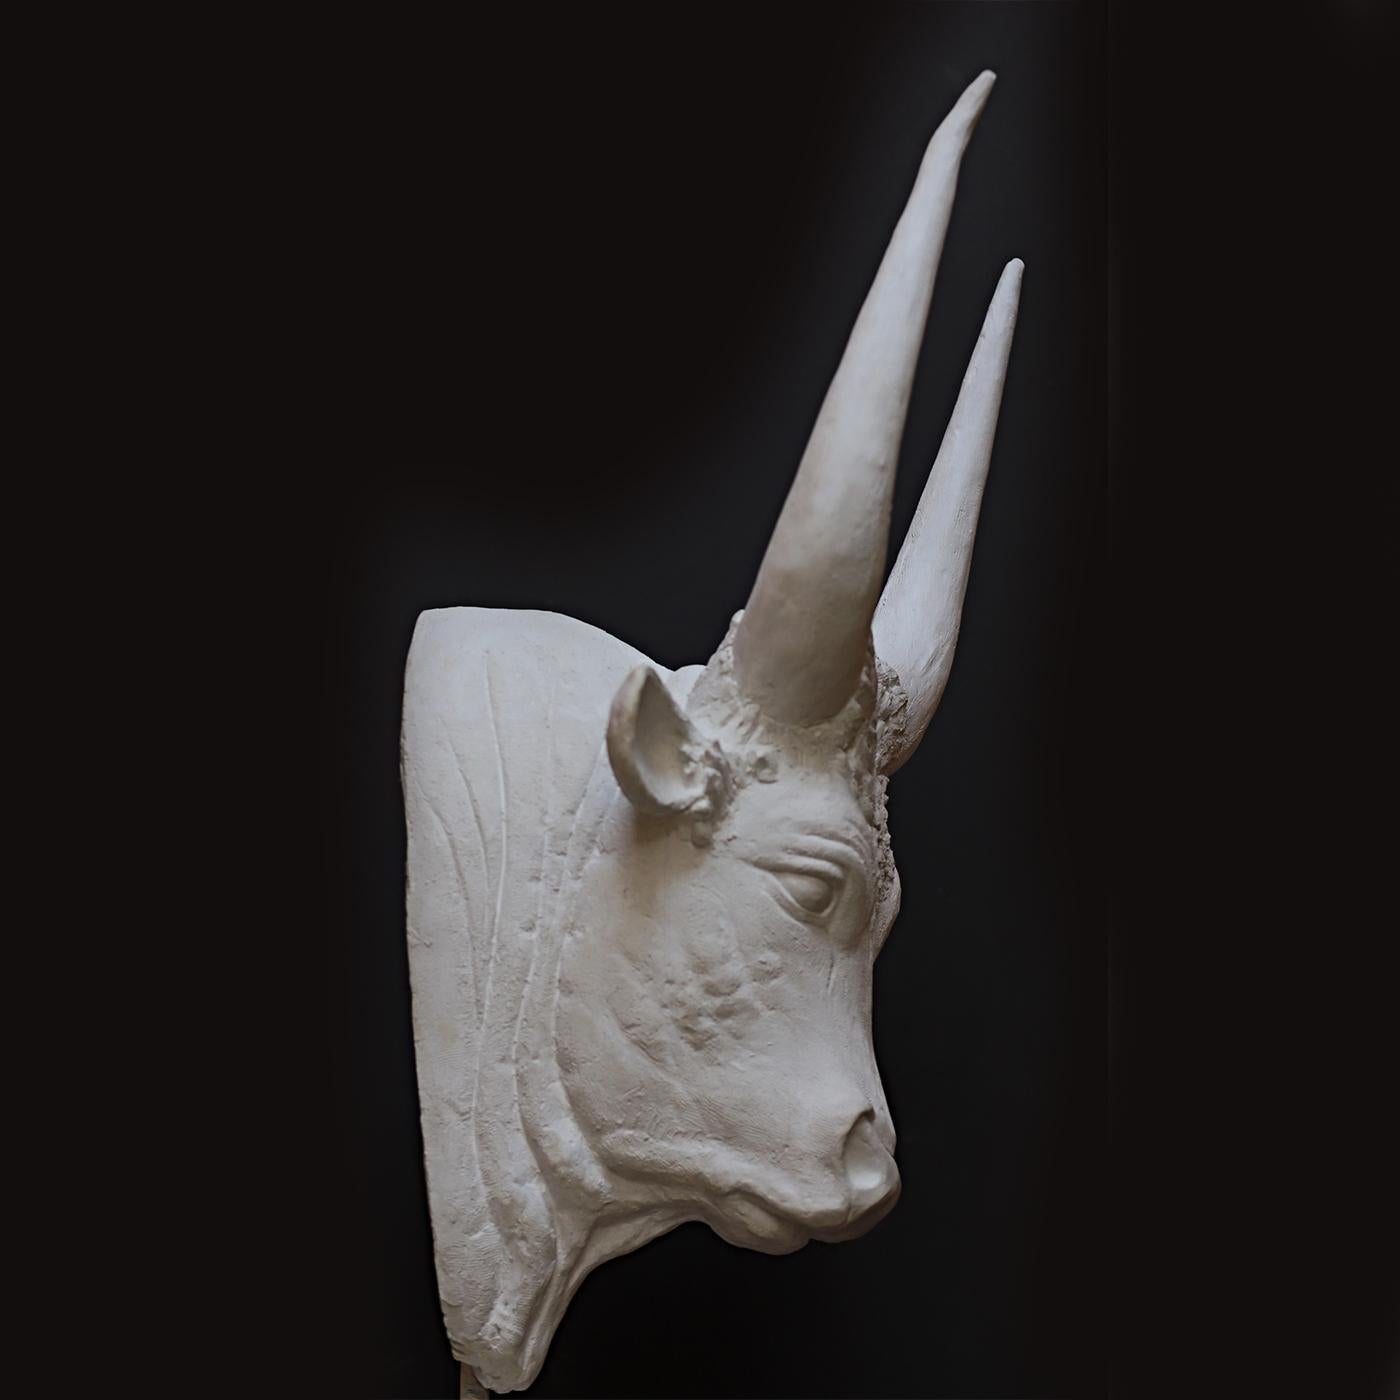 Symbol of strength and vitality, the bull is a renowned symbol in ancient Roman art. Bold and majestic with a captivating gaze, it is deftly handmade of gypsum by the artists of the Romanelli workshop. It can be effortlessly attached to an empty